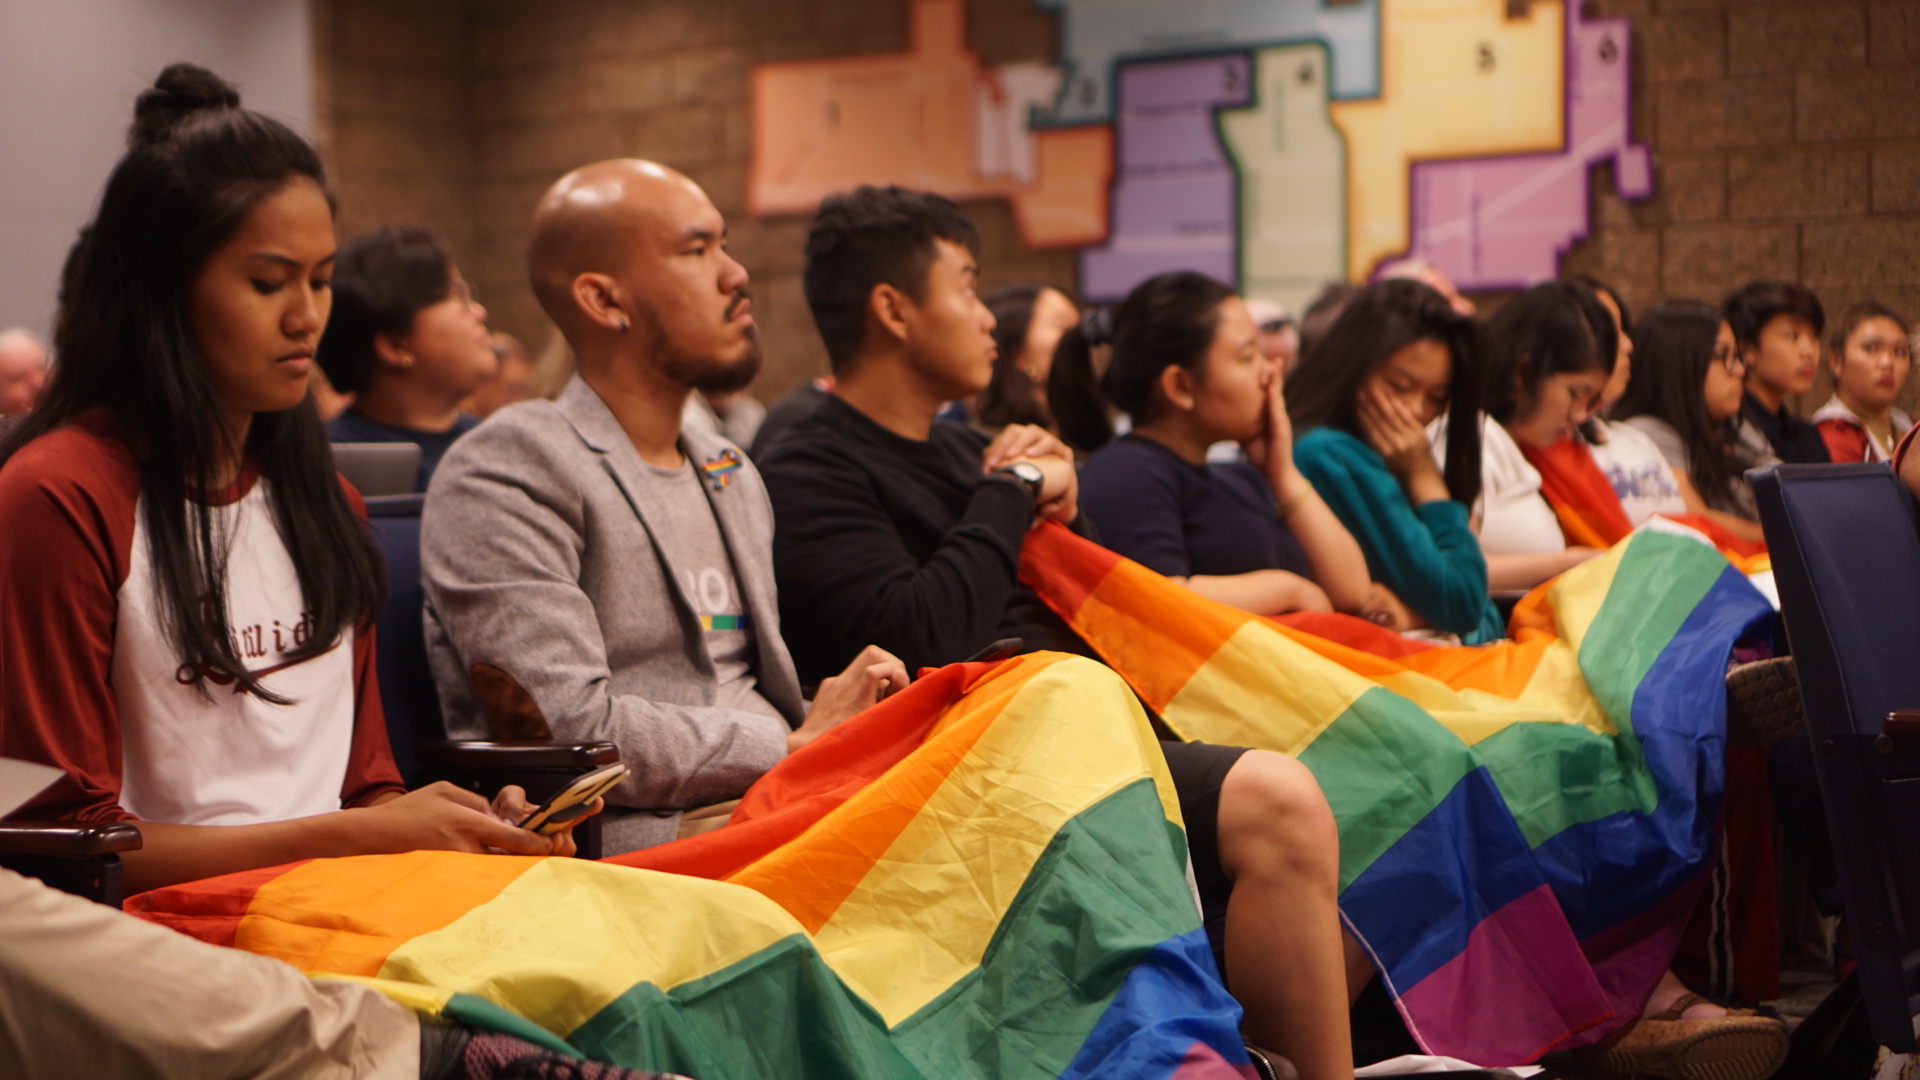 Queerness is Integral to Vietnamese Culture – Garden Grove Should Fly the Pride Flag to Honor Our Communities